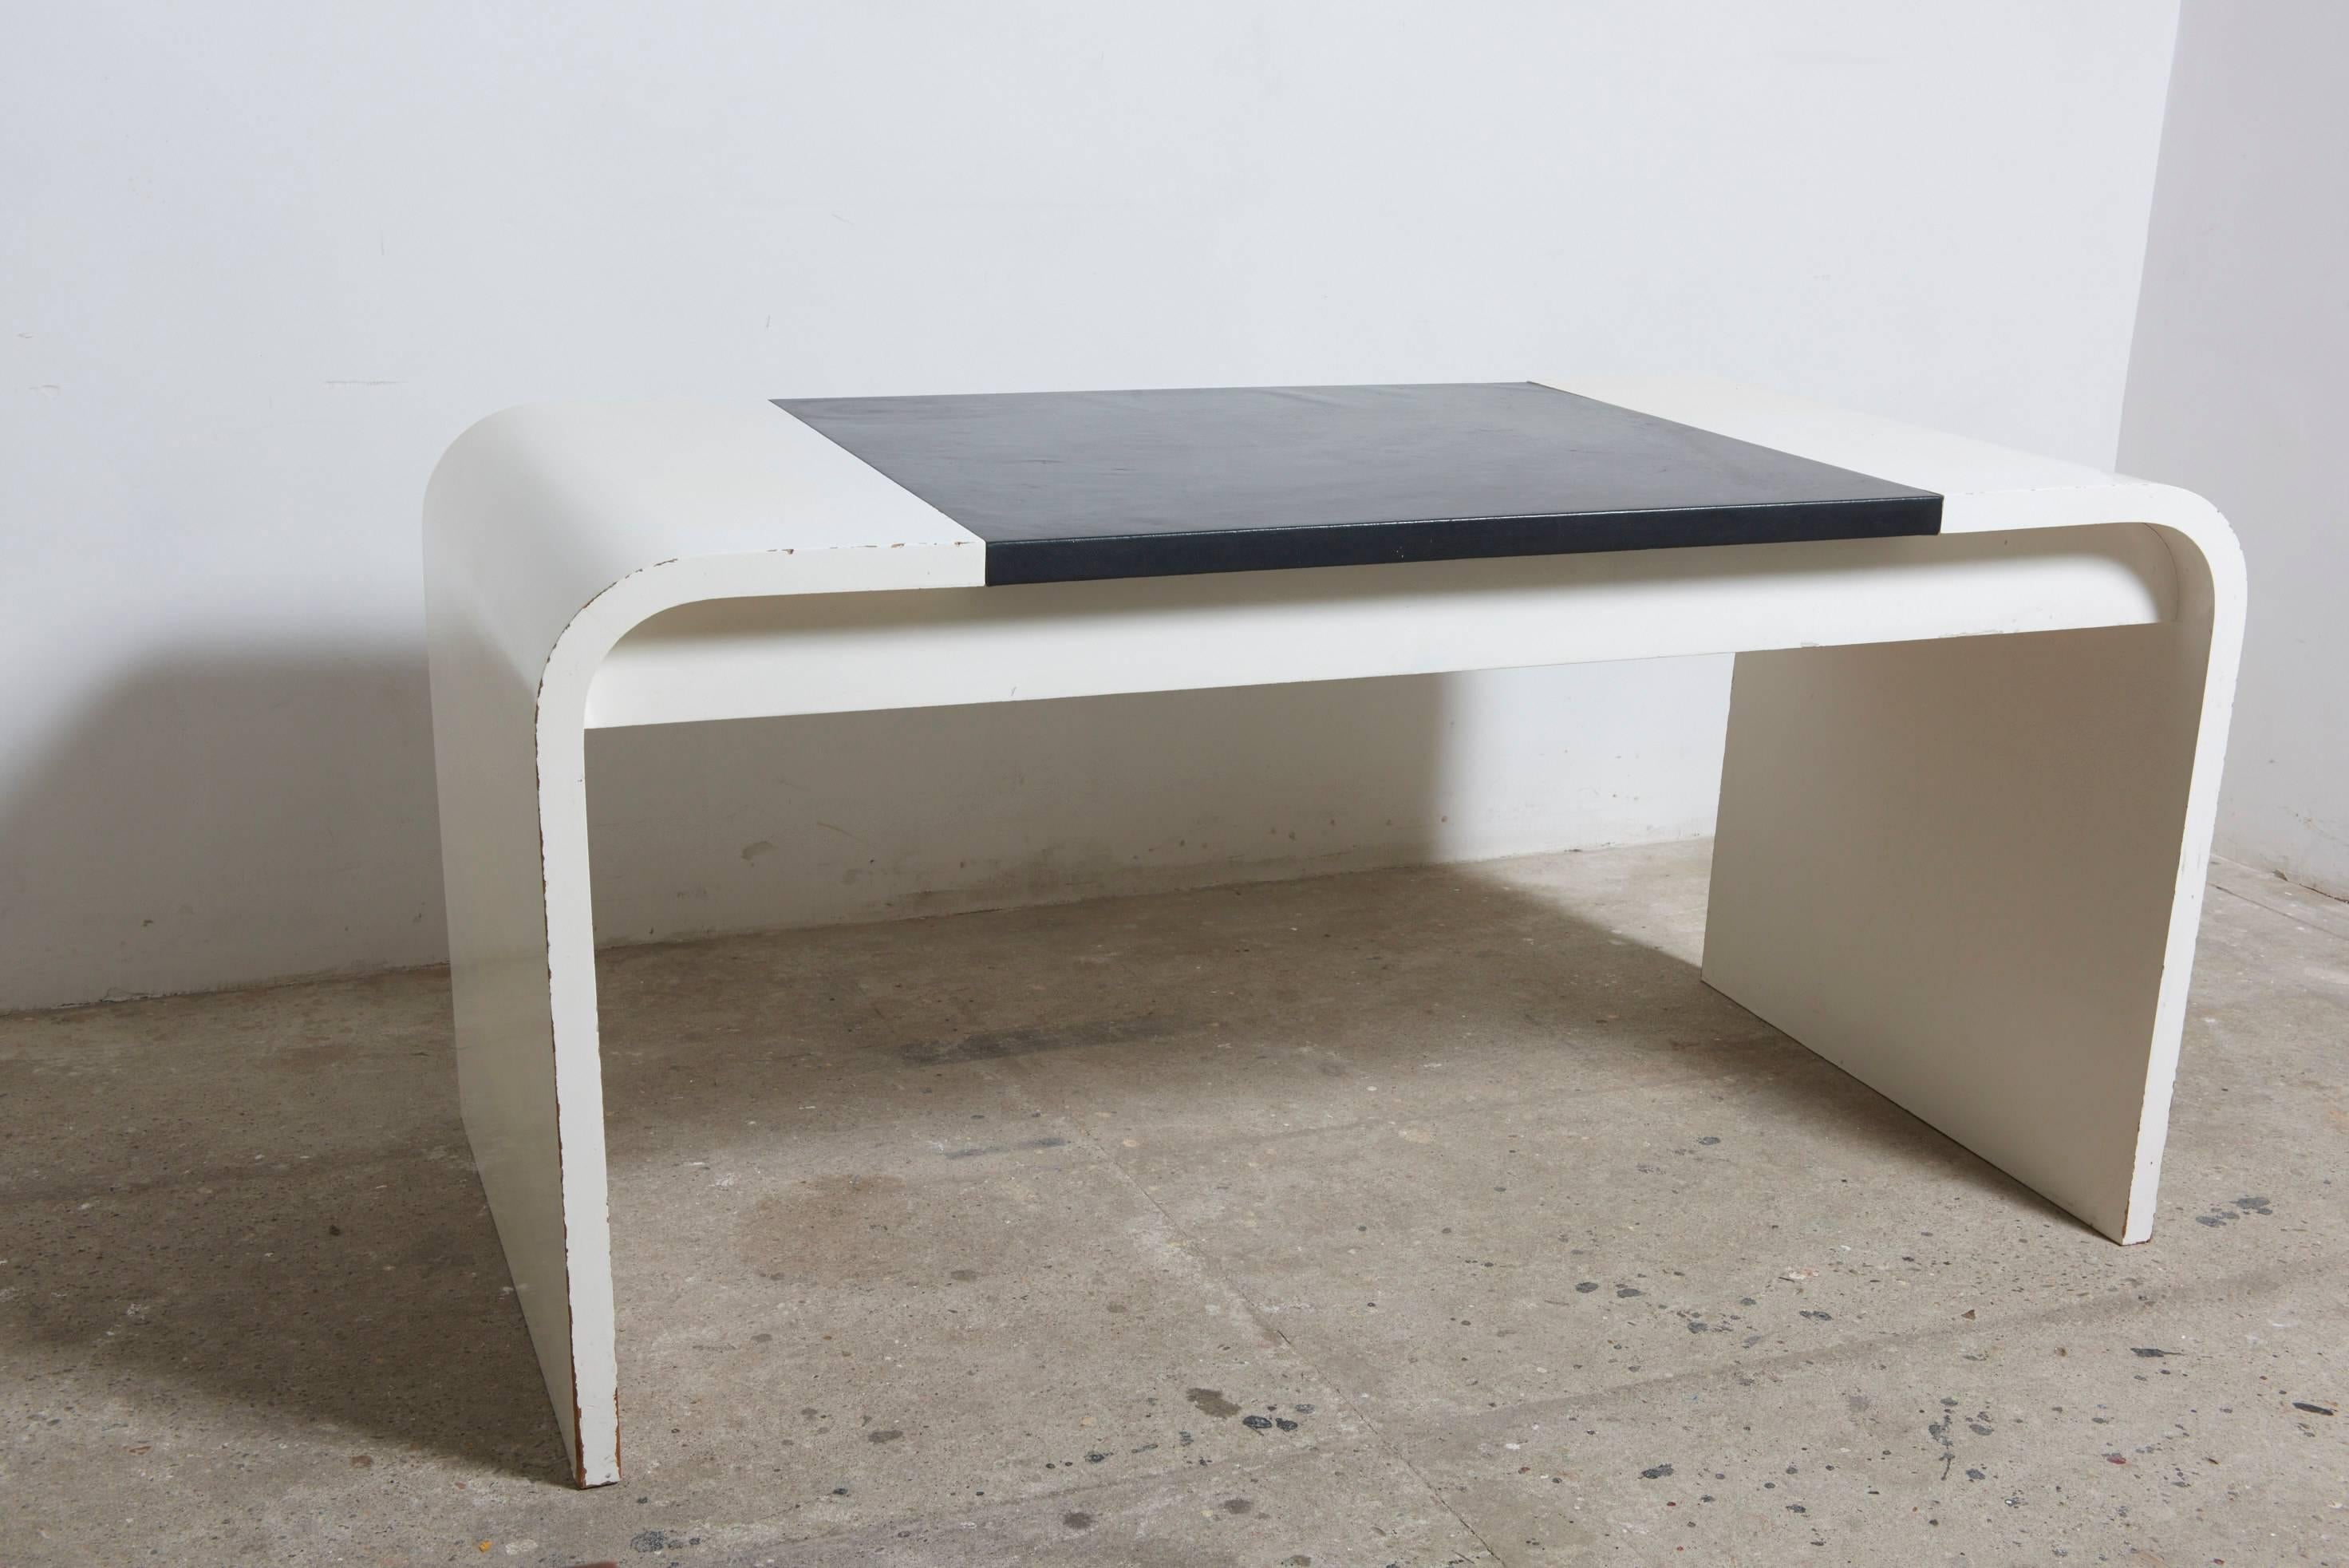 Wood Black and White 1960s Desk Designed by the Coene